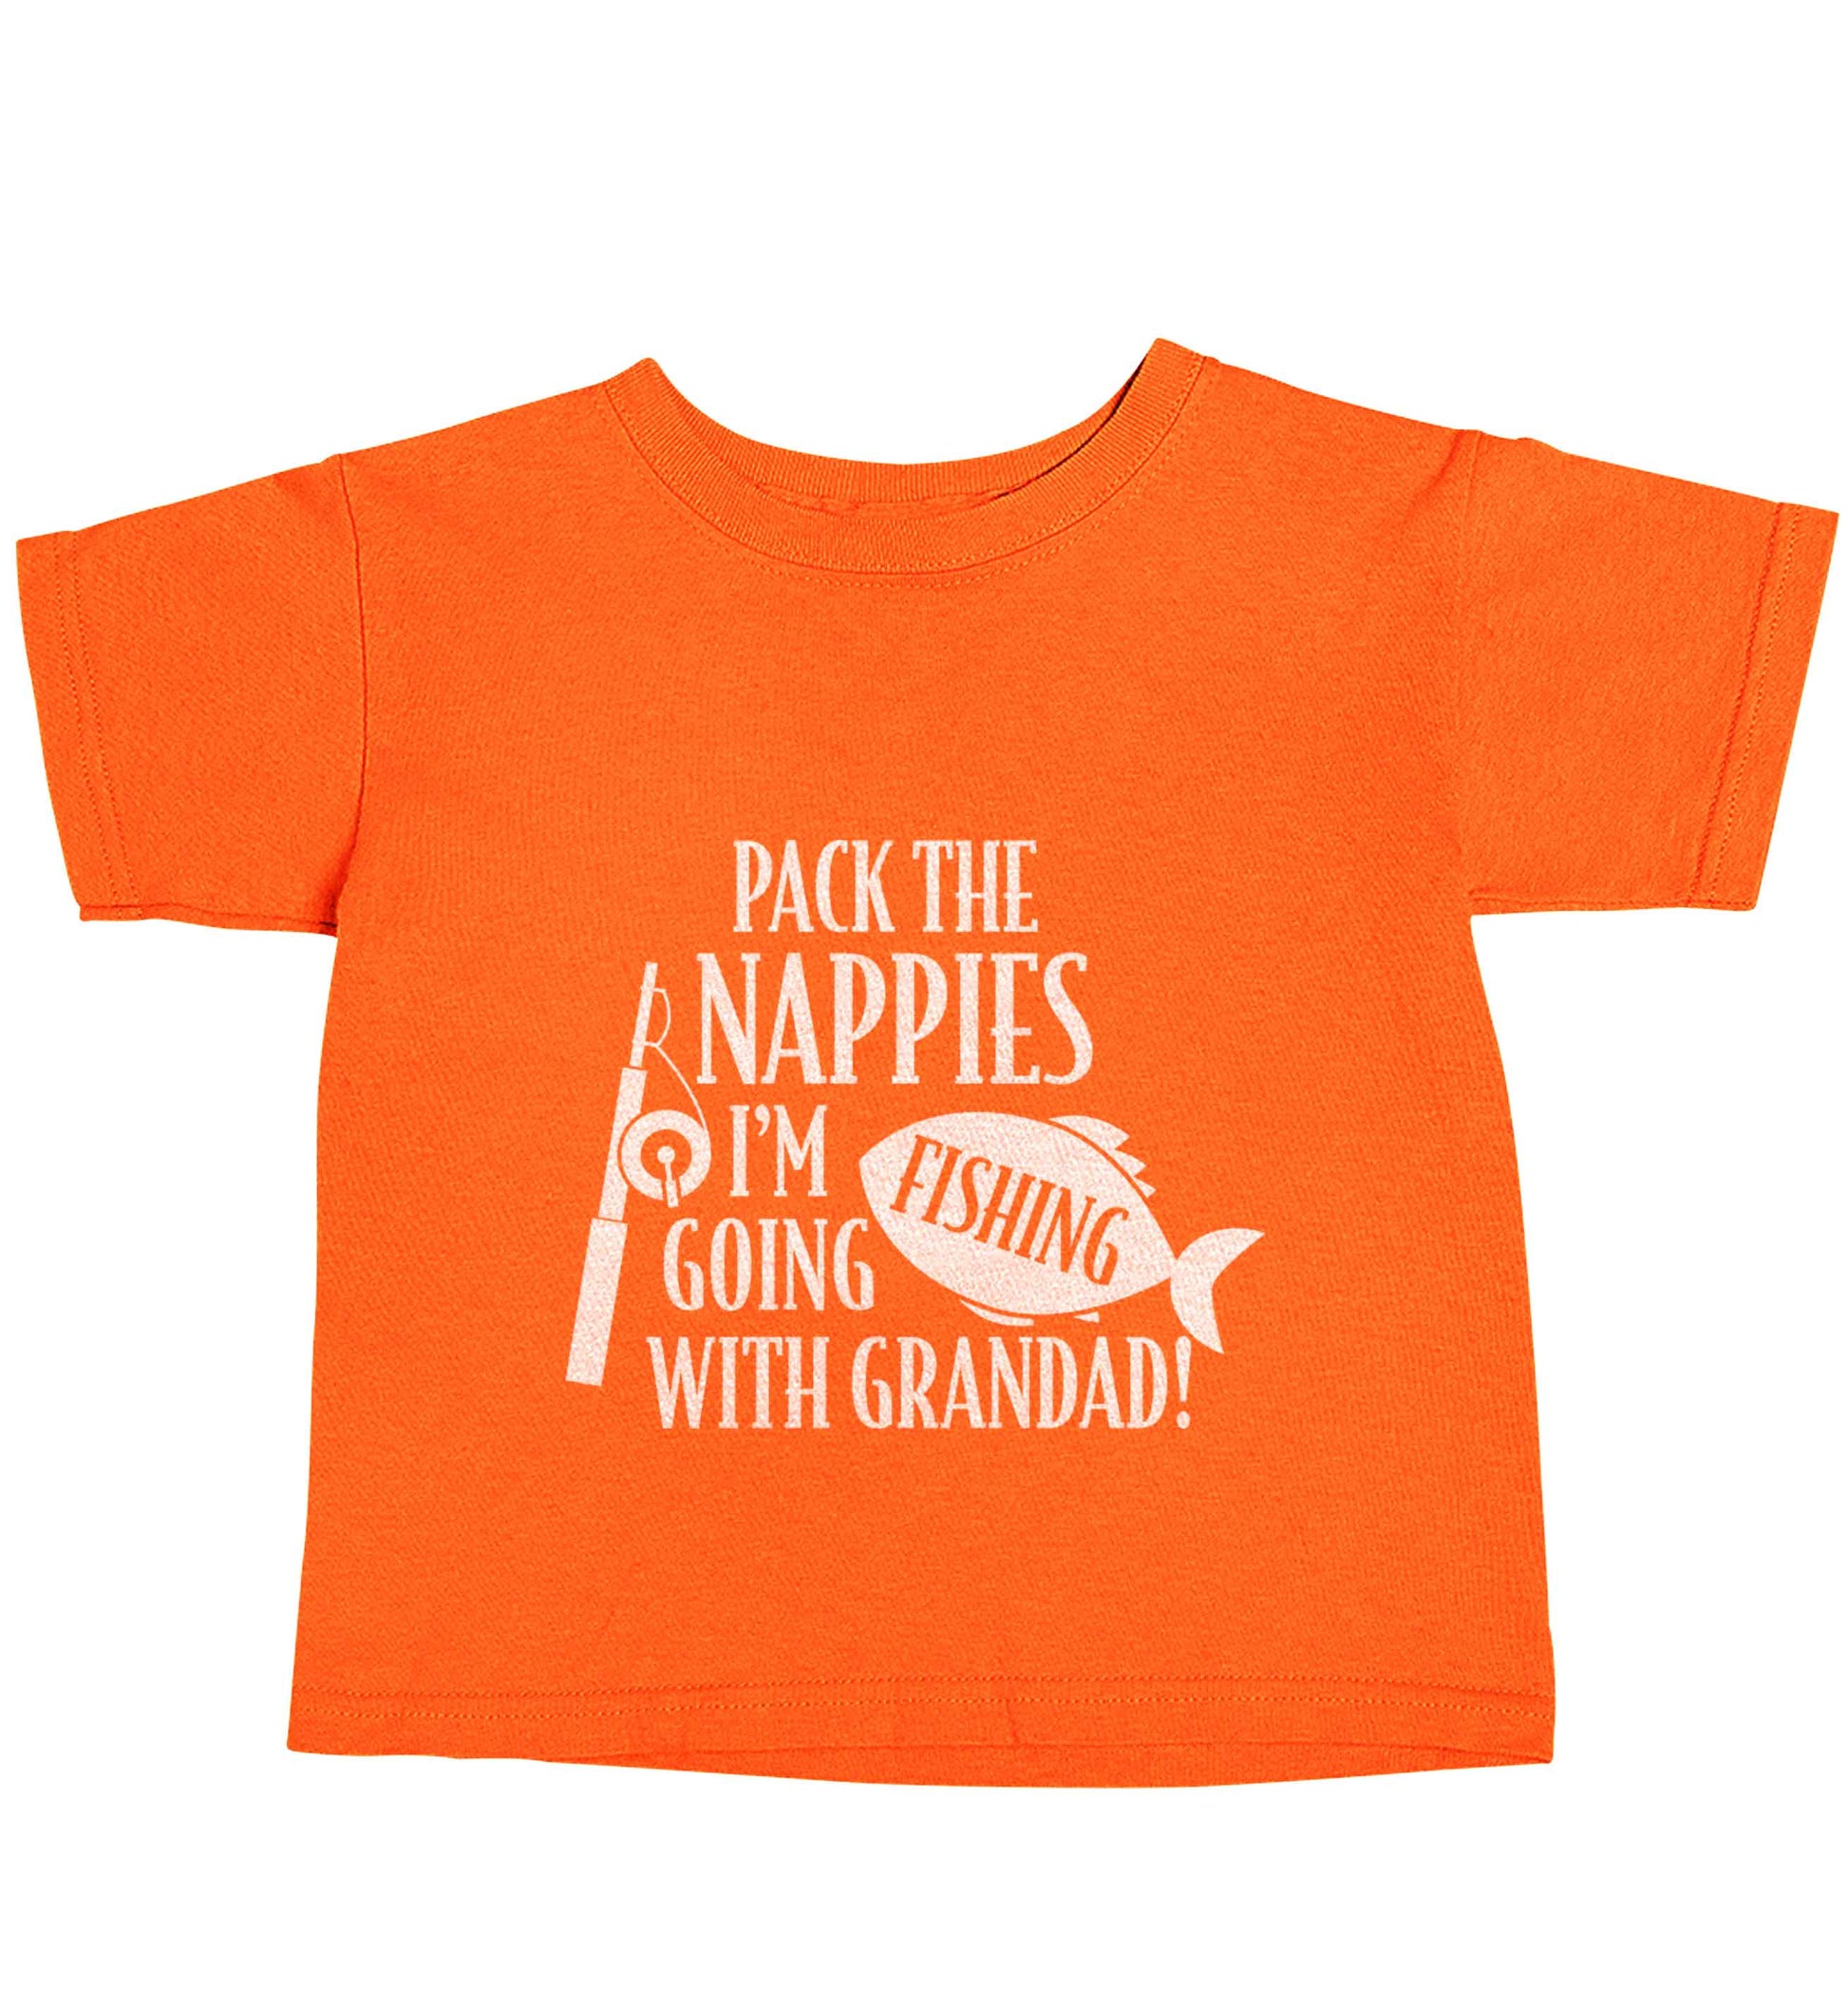 Pack the nappies I'm going fishing with Grandad orange baby toddler Tshirt 2 Years